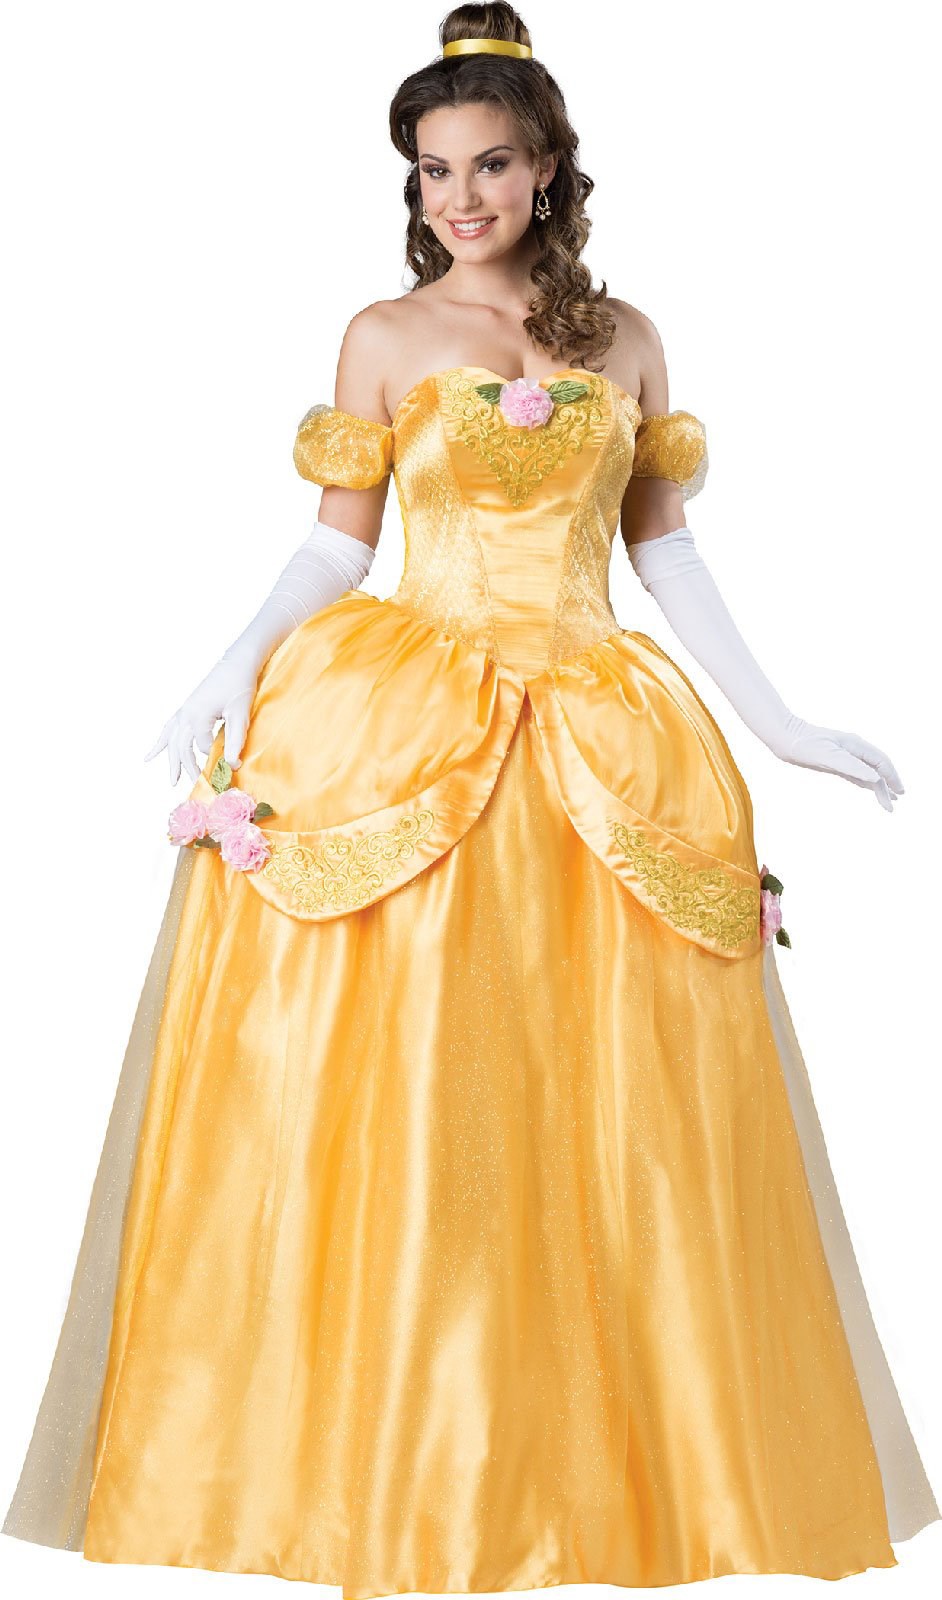 Yellow Fairytale Princess Elite Costume For Adults